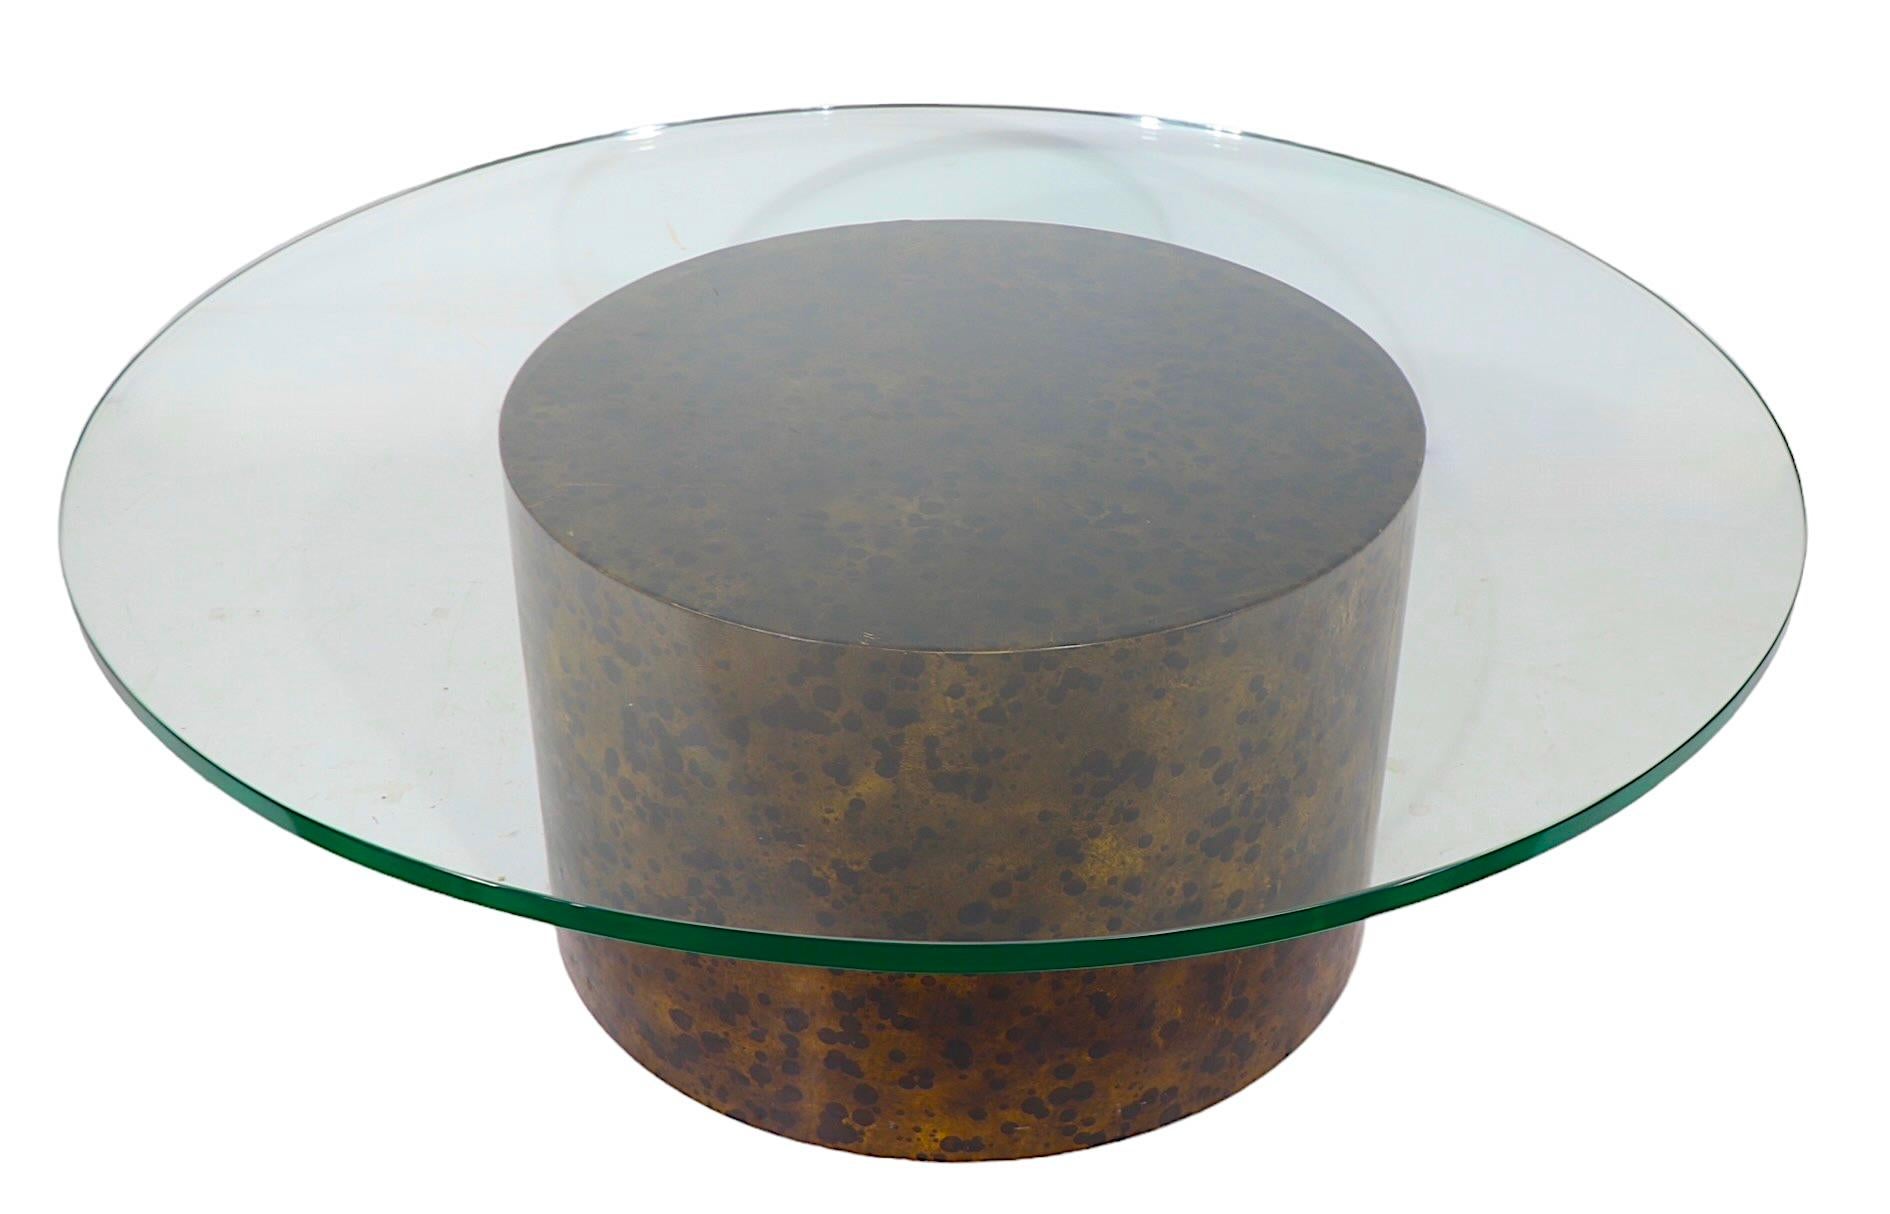 Brutalist Parchment and Glass Coffee Table in the style of Aldo Tura c 1970's For Sale